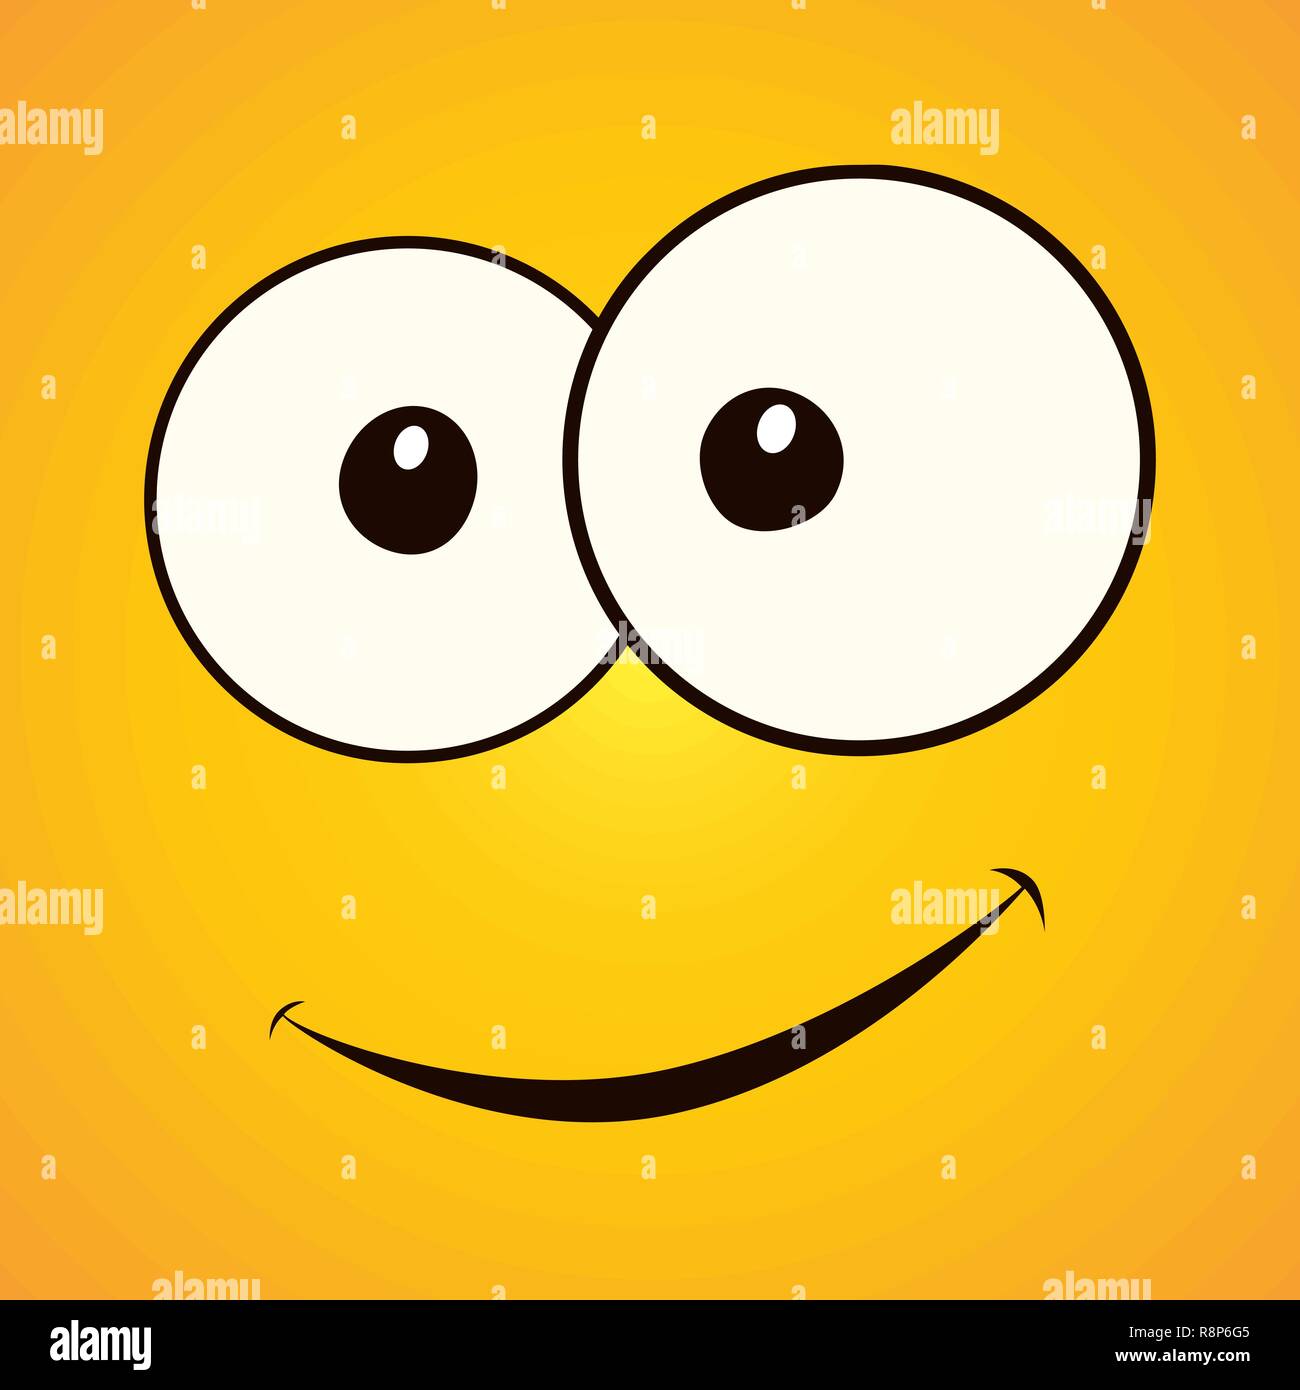 Smiley face. Vector illustration. Cute happy face. Yellow smile poster Stock Vector